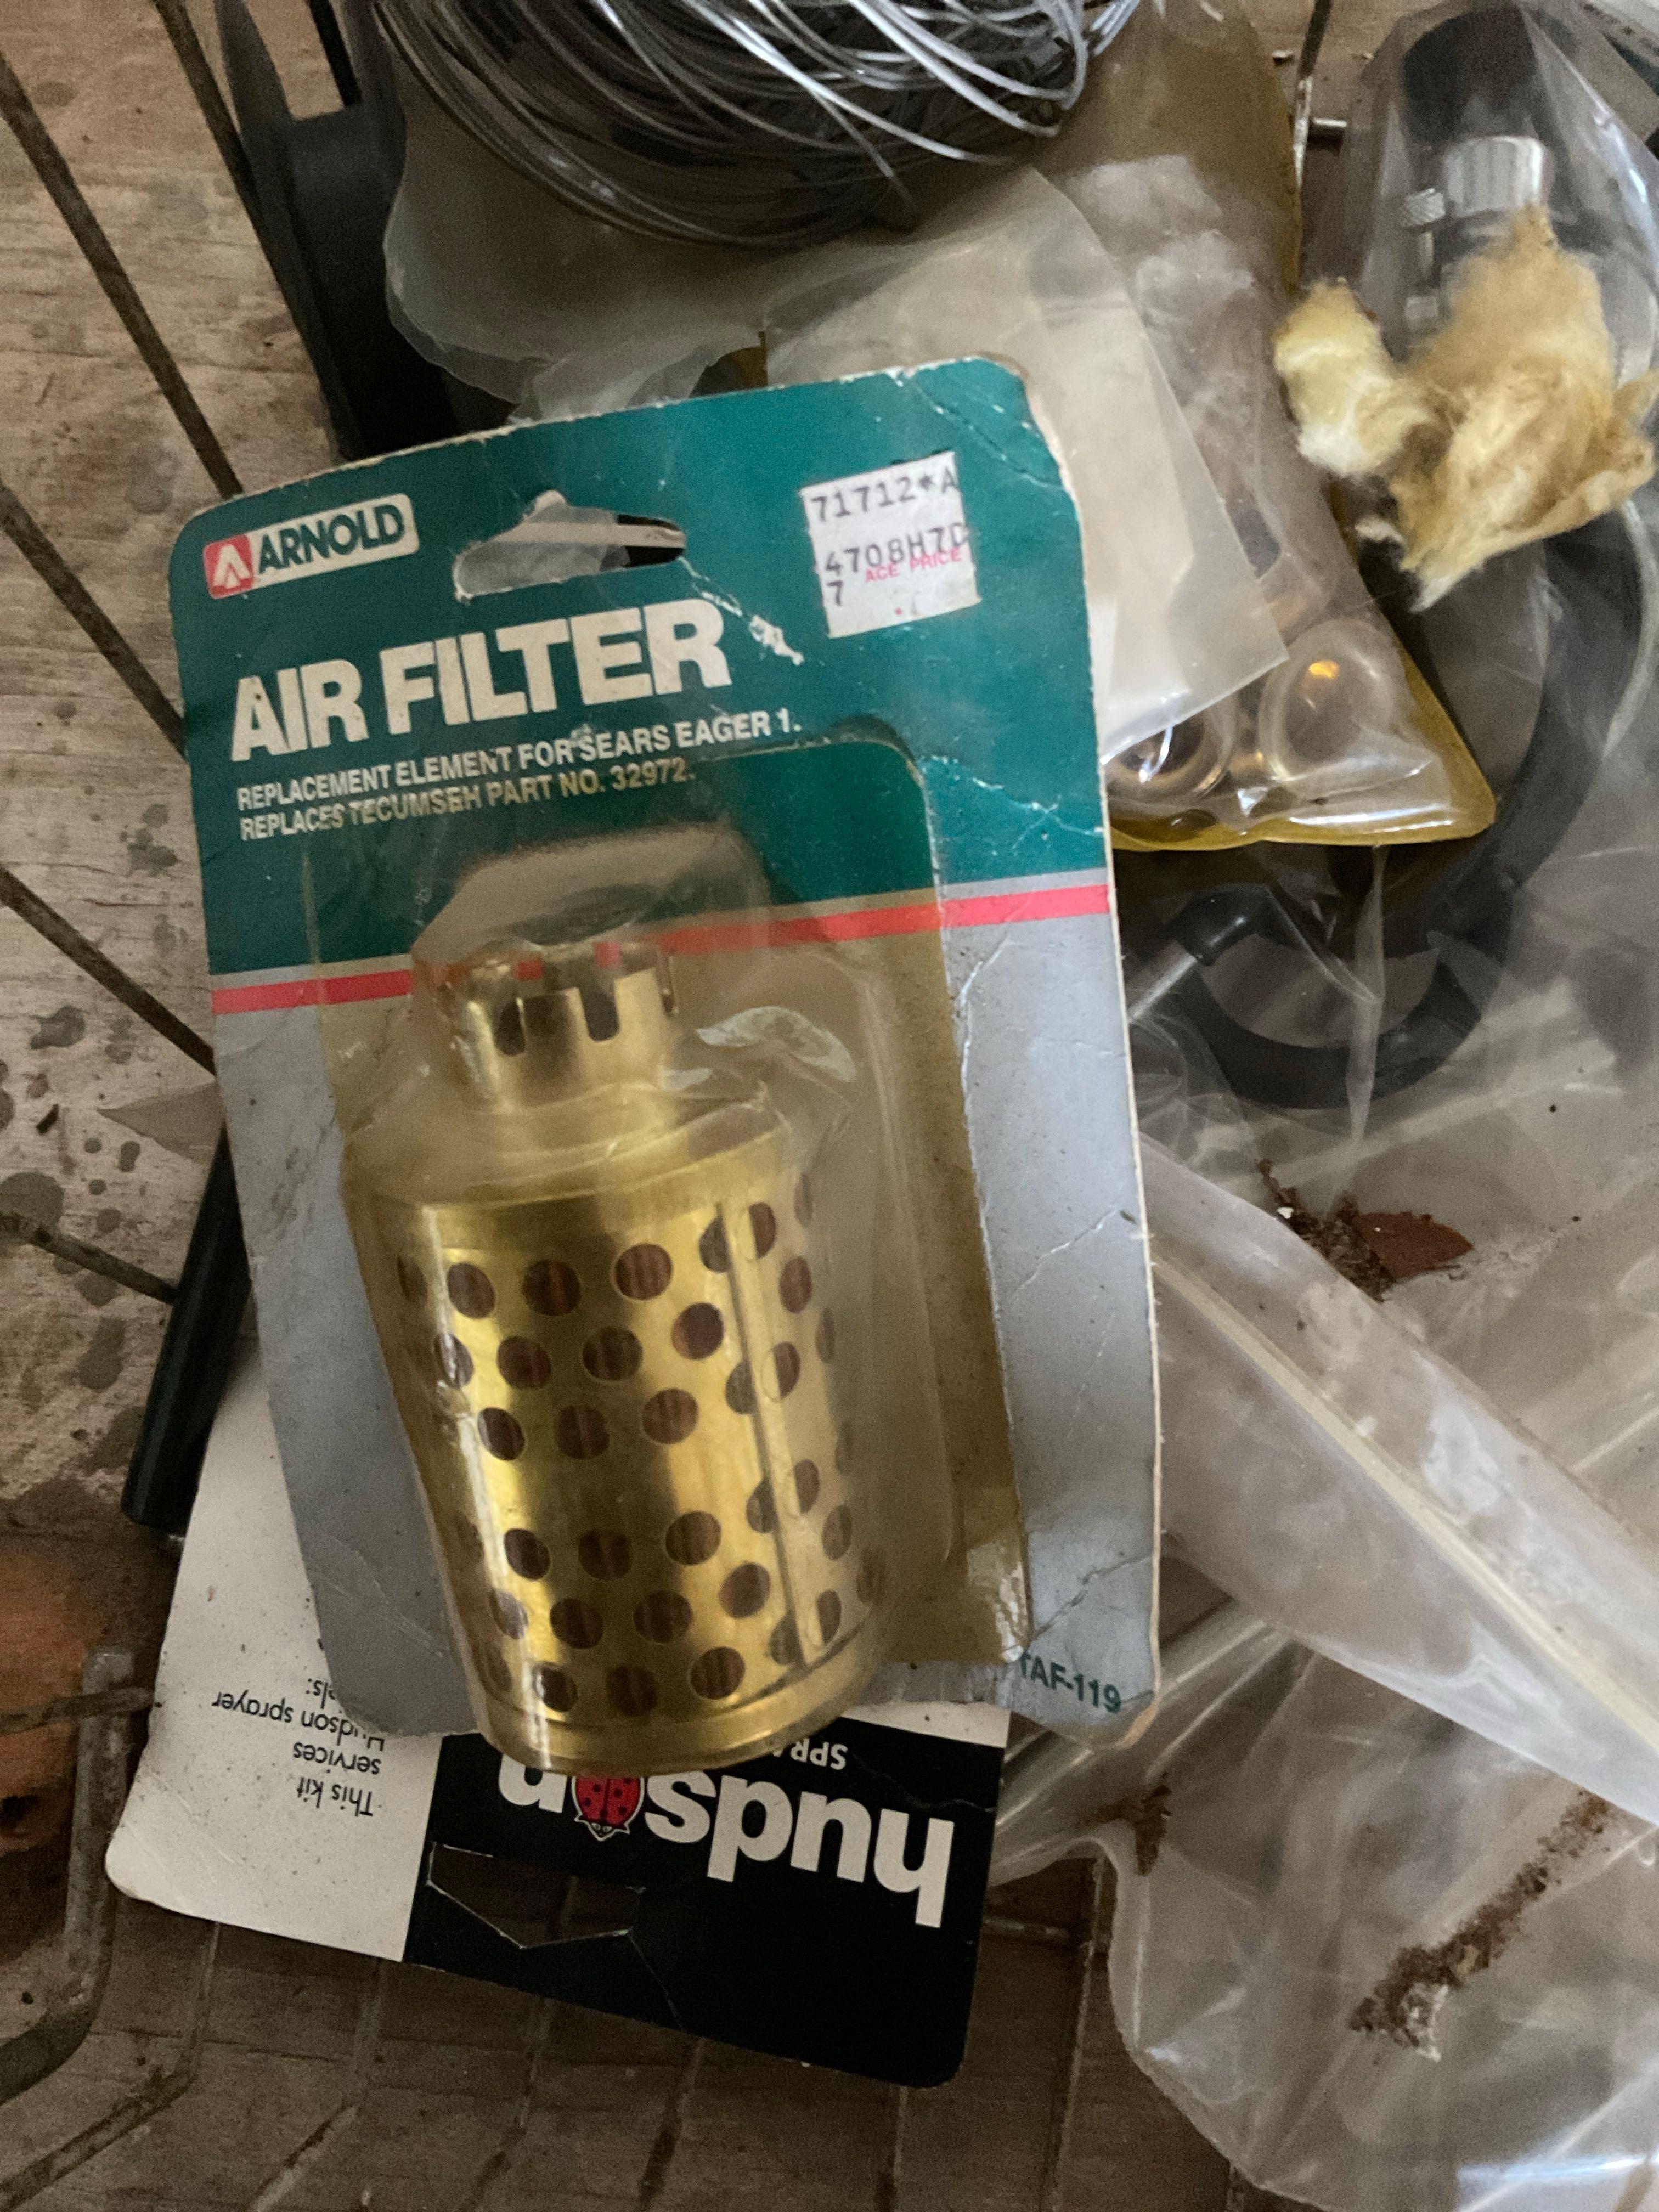 Air filter and more